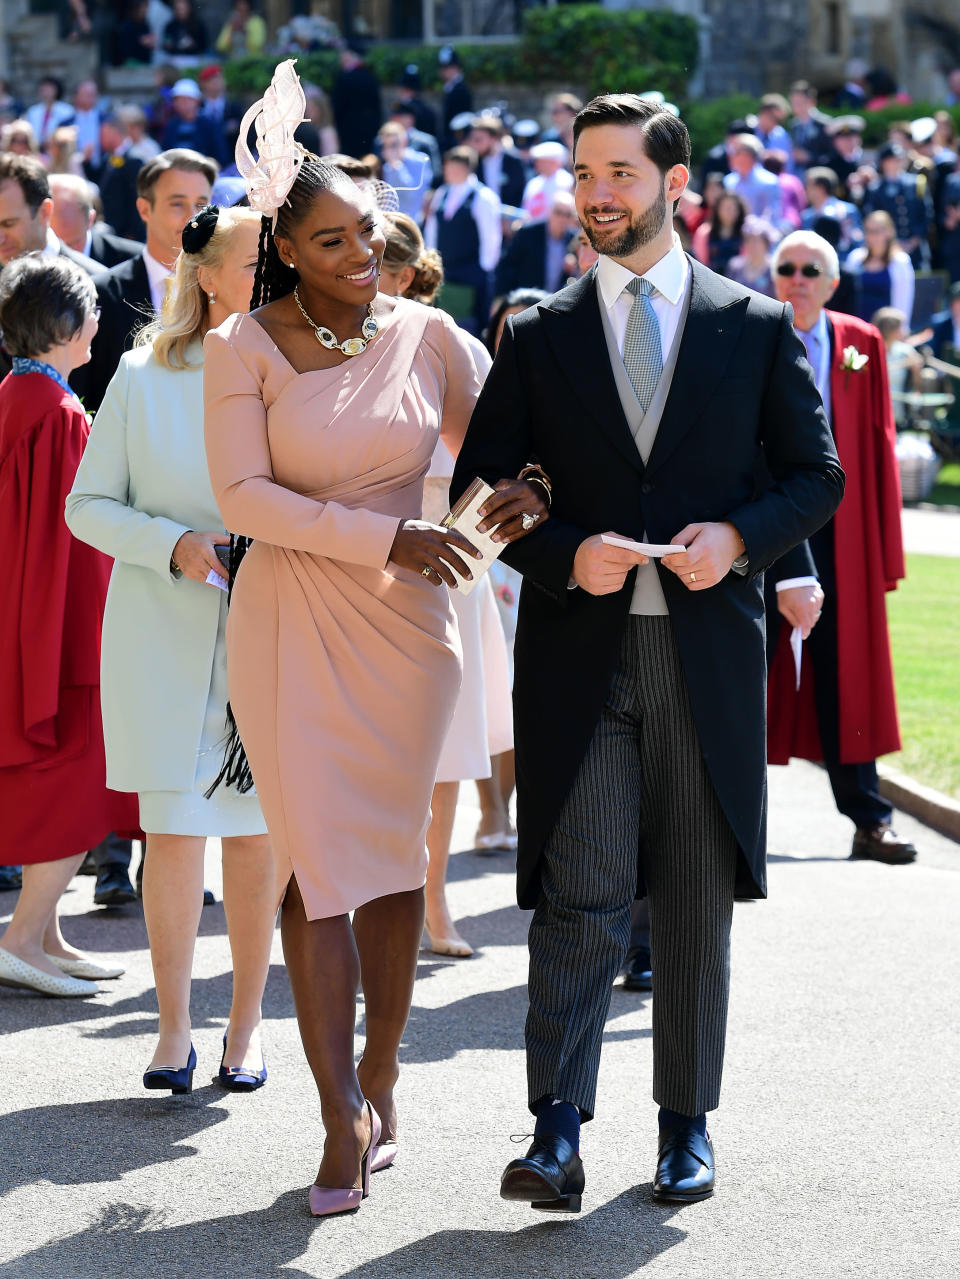 Serena and her husband Alexis at the royal wedding [Photo: Getty]